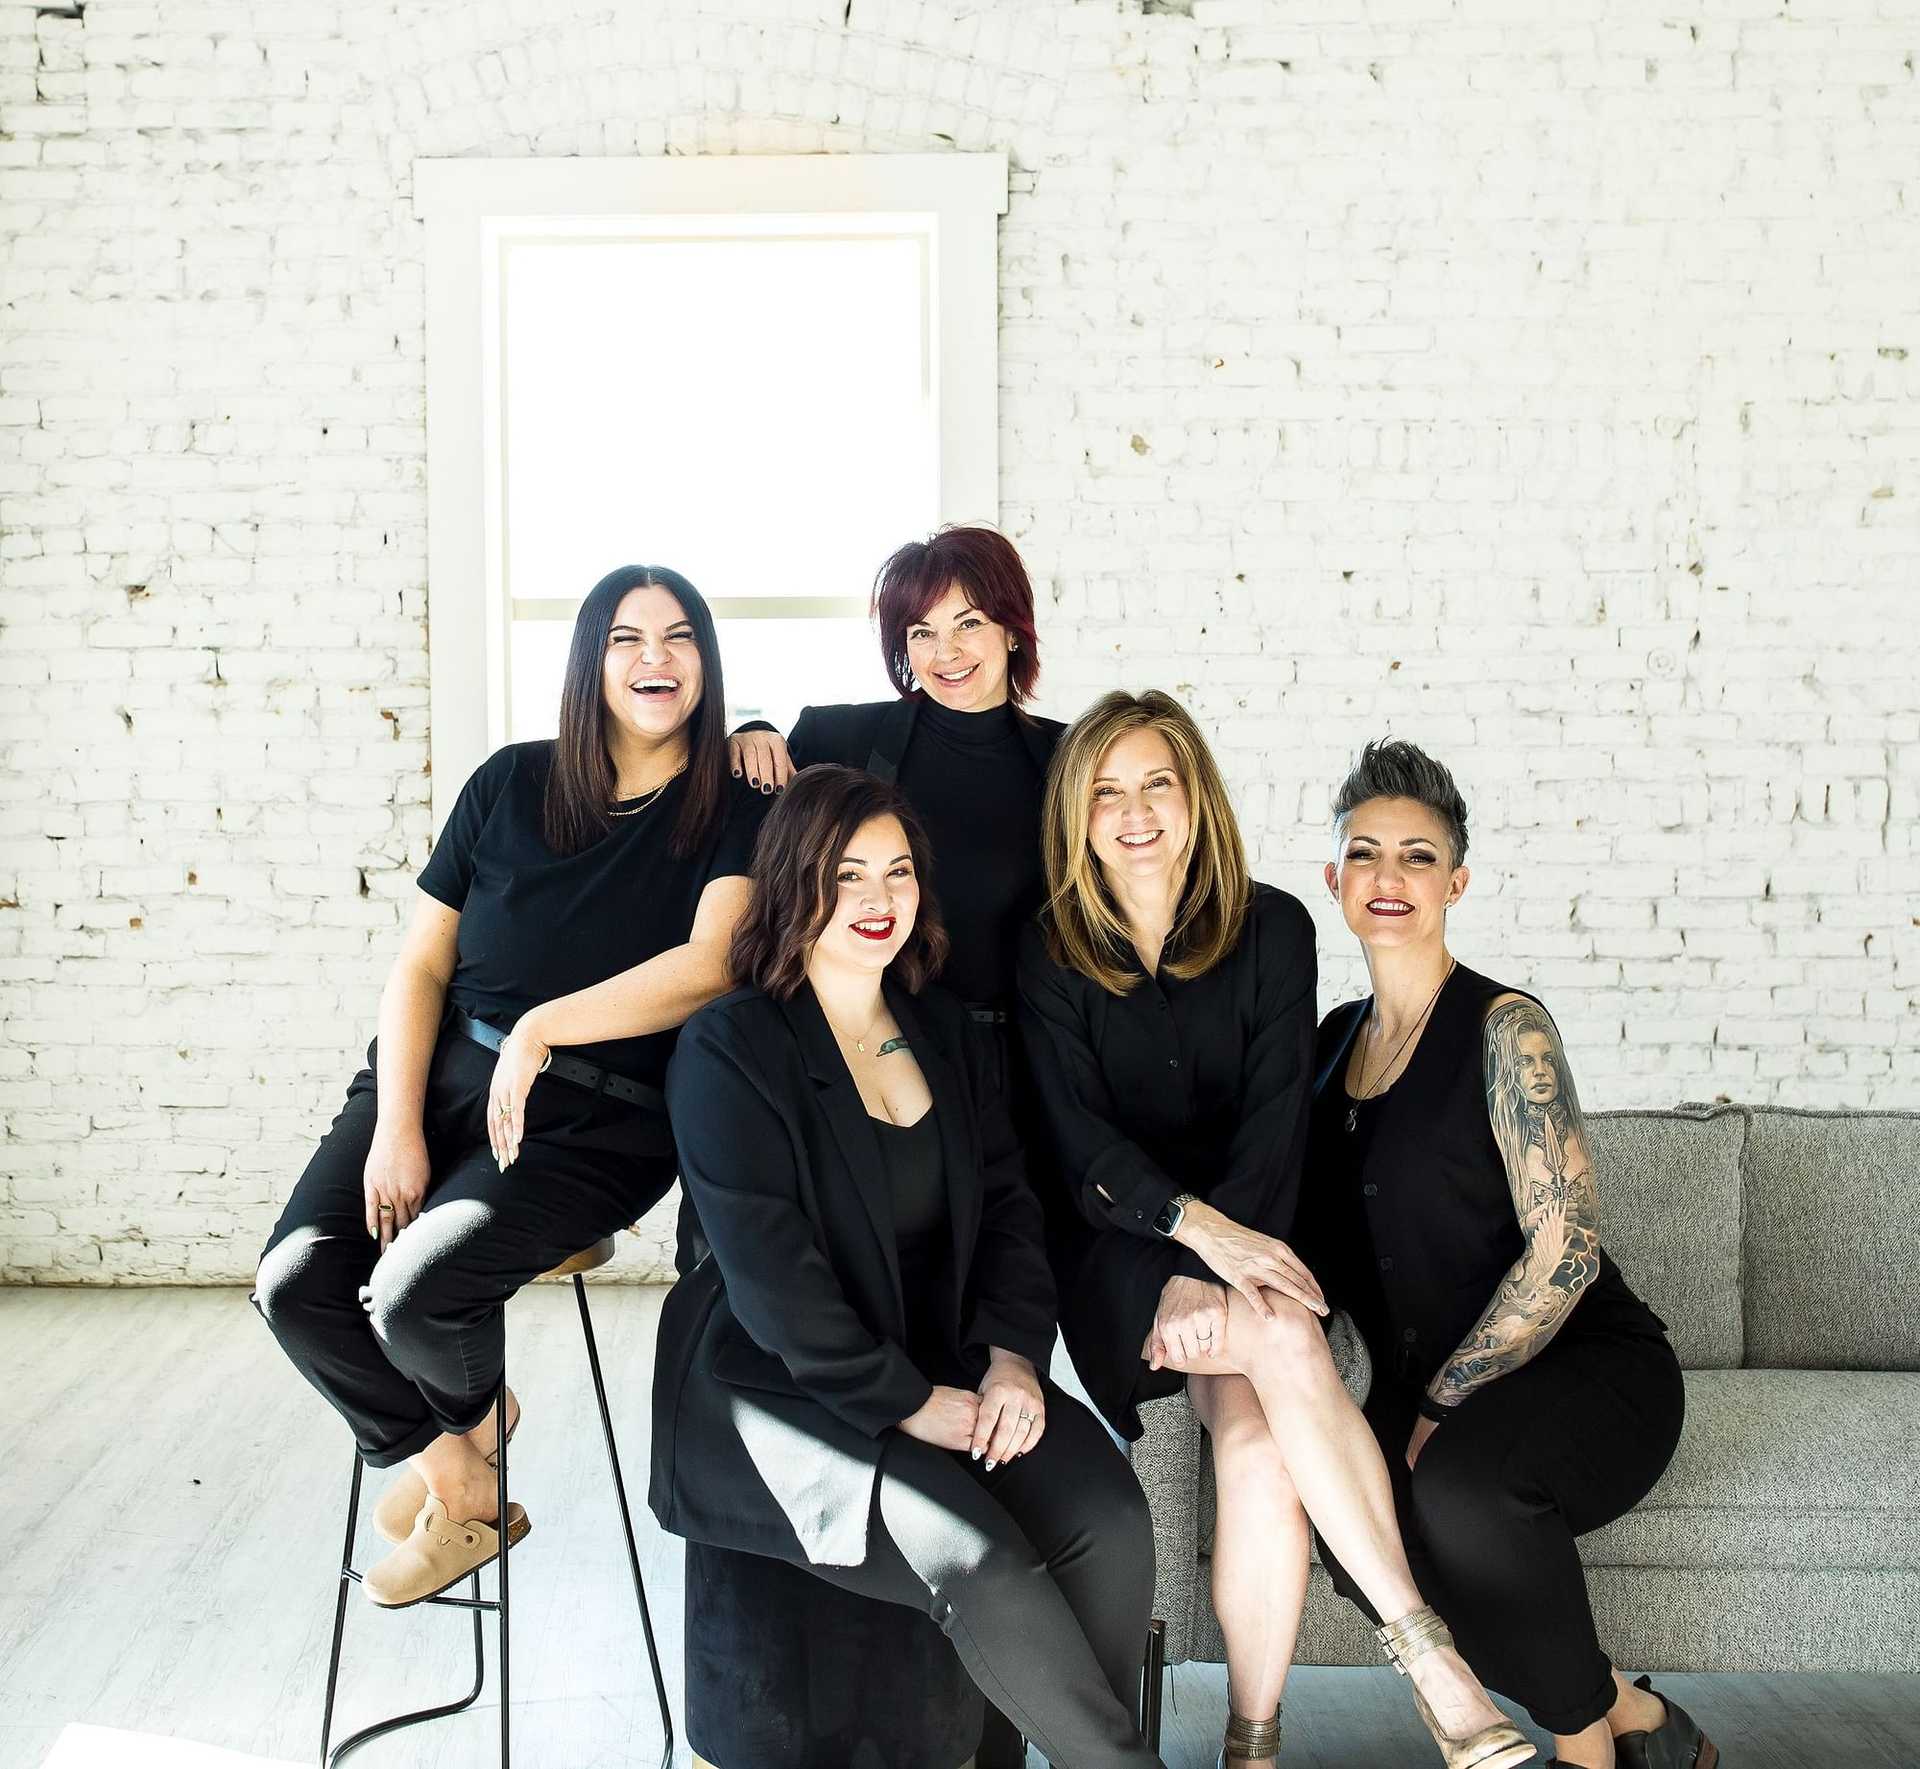 Five women in black smiling together in a white room.